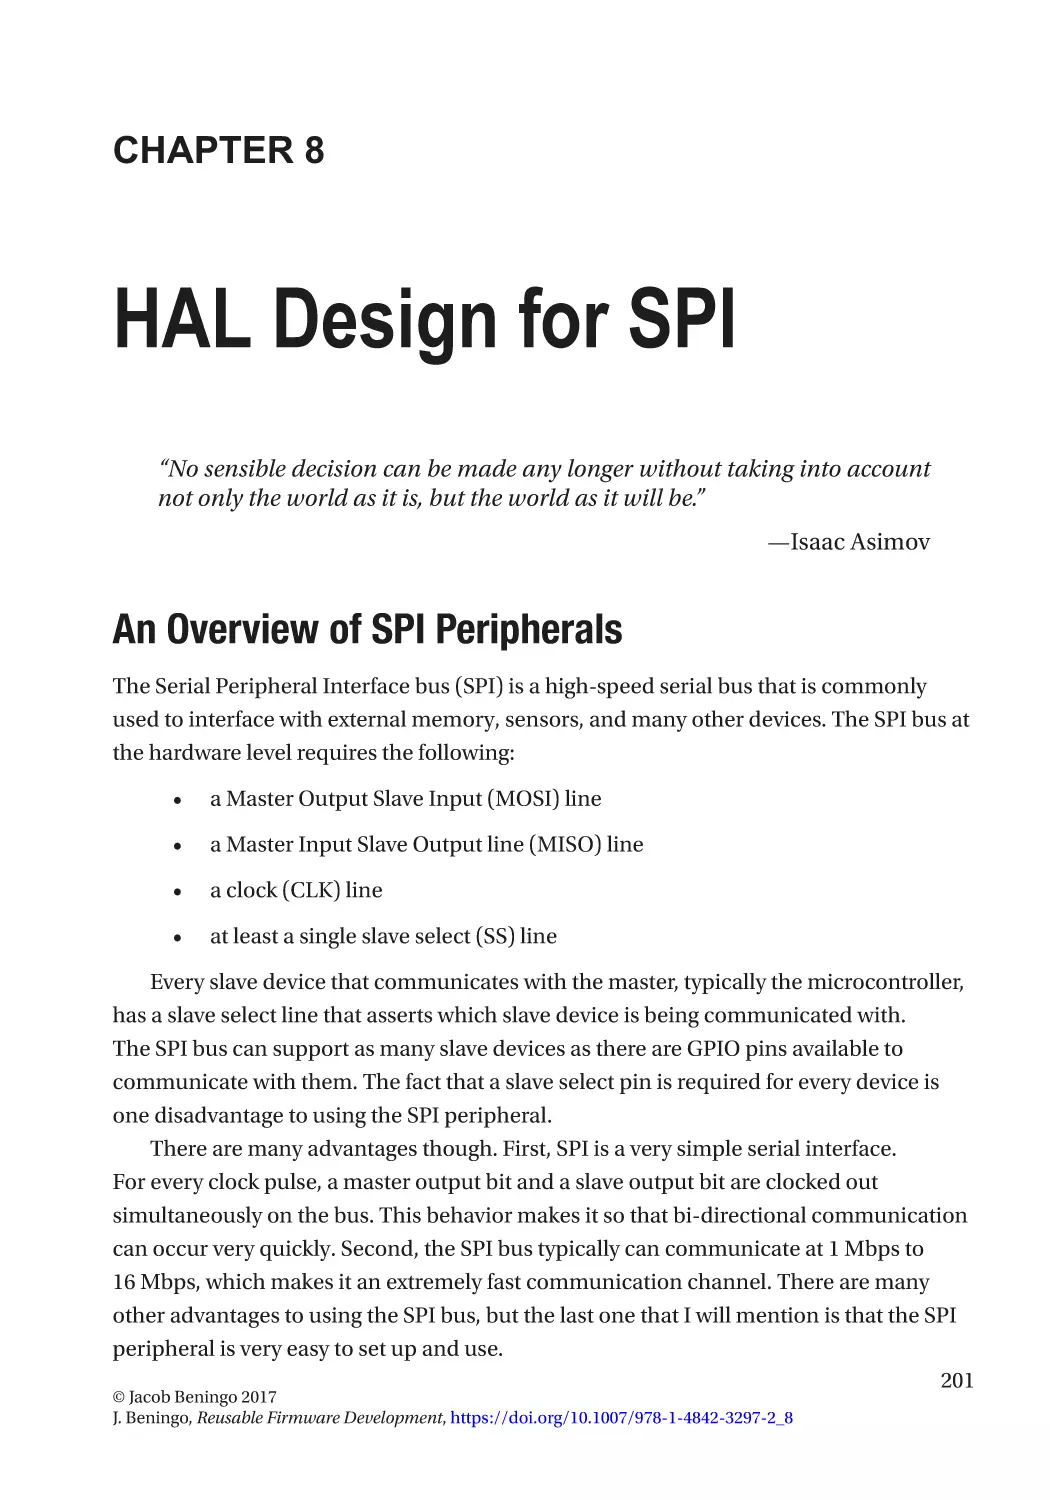 Chapter 8
An Overview of SPI Peripherals